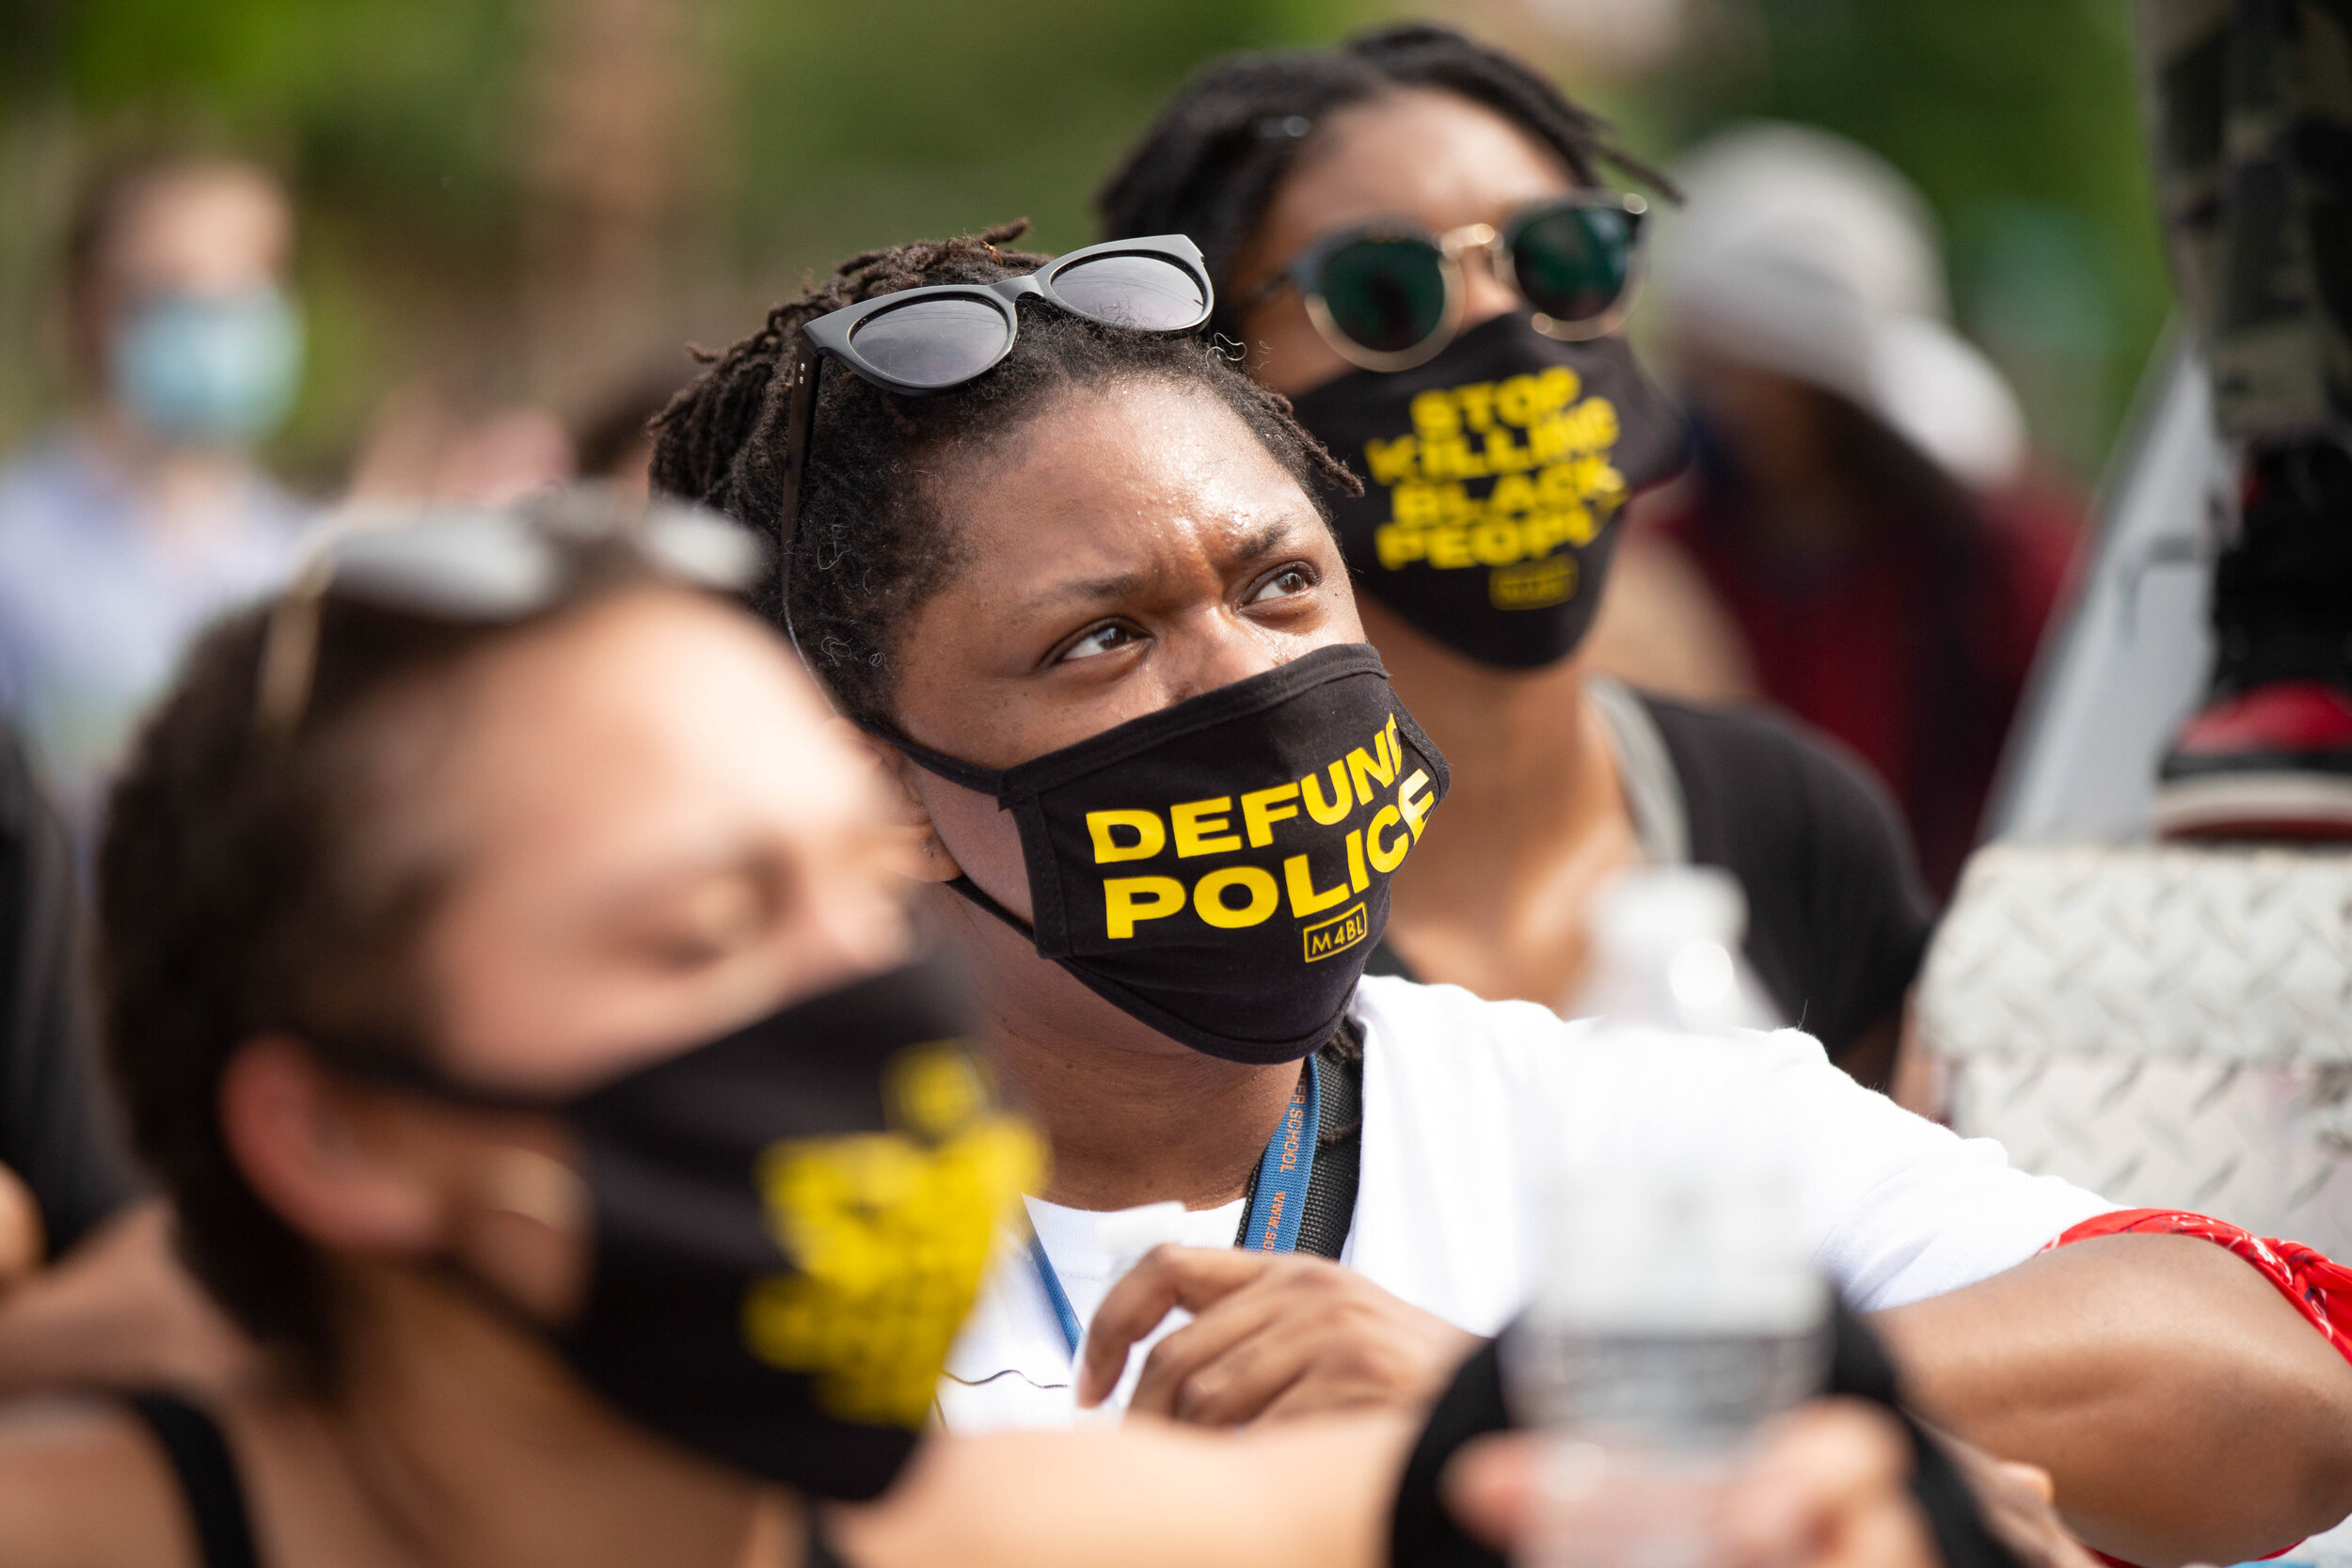  Protestres watch the New Black City Dance Group perfom during a protest to demand the defunding of the Minneapolis Police Department in Minneapolis, Minnesota on Jun 6, 2020. 